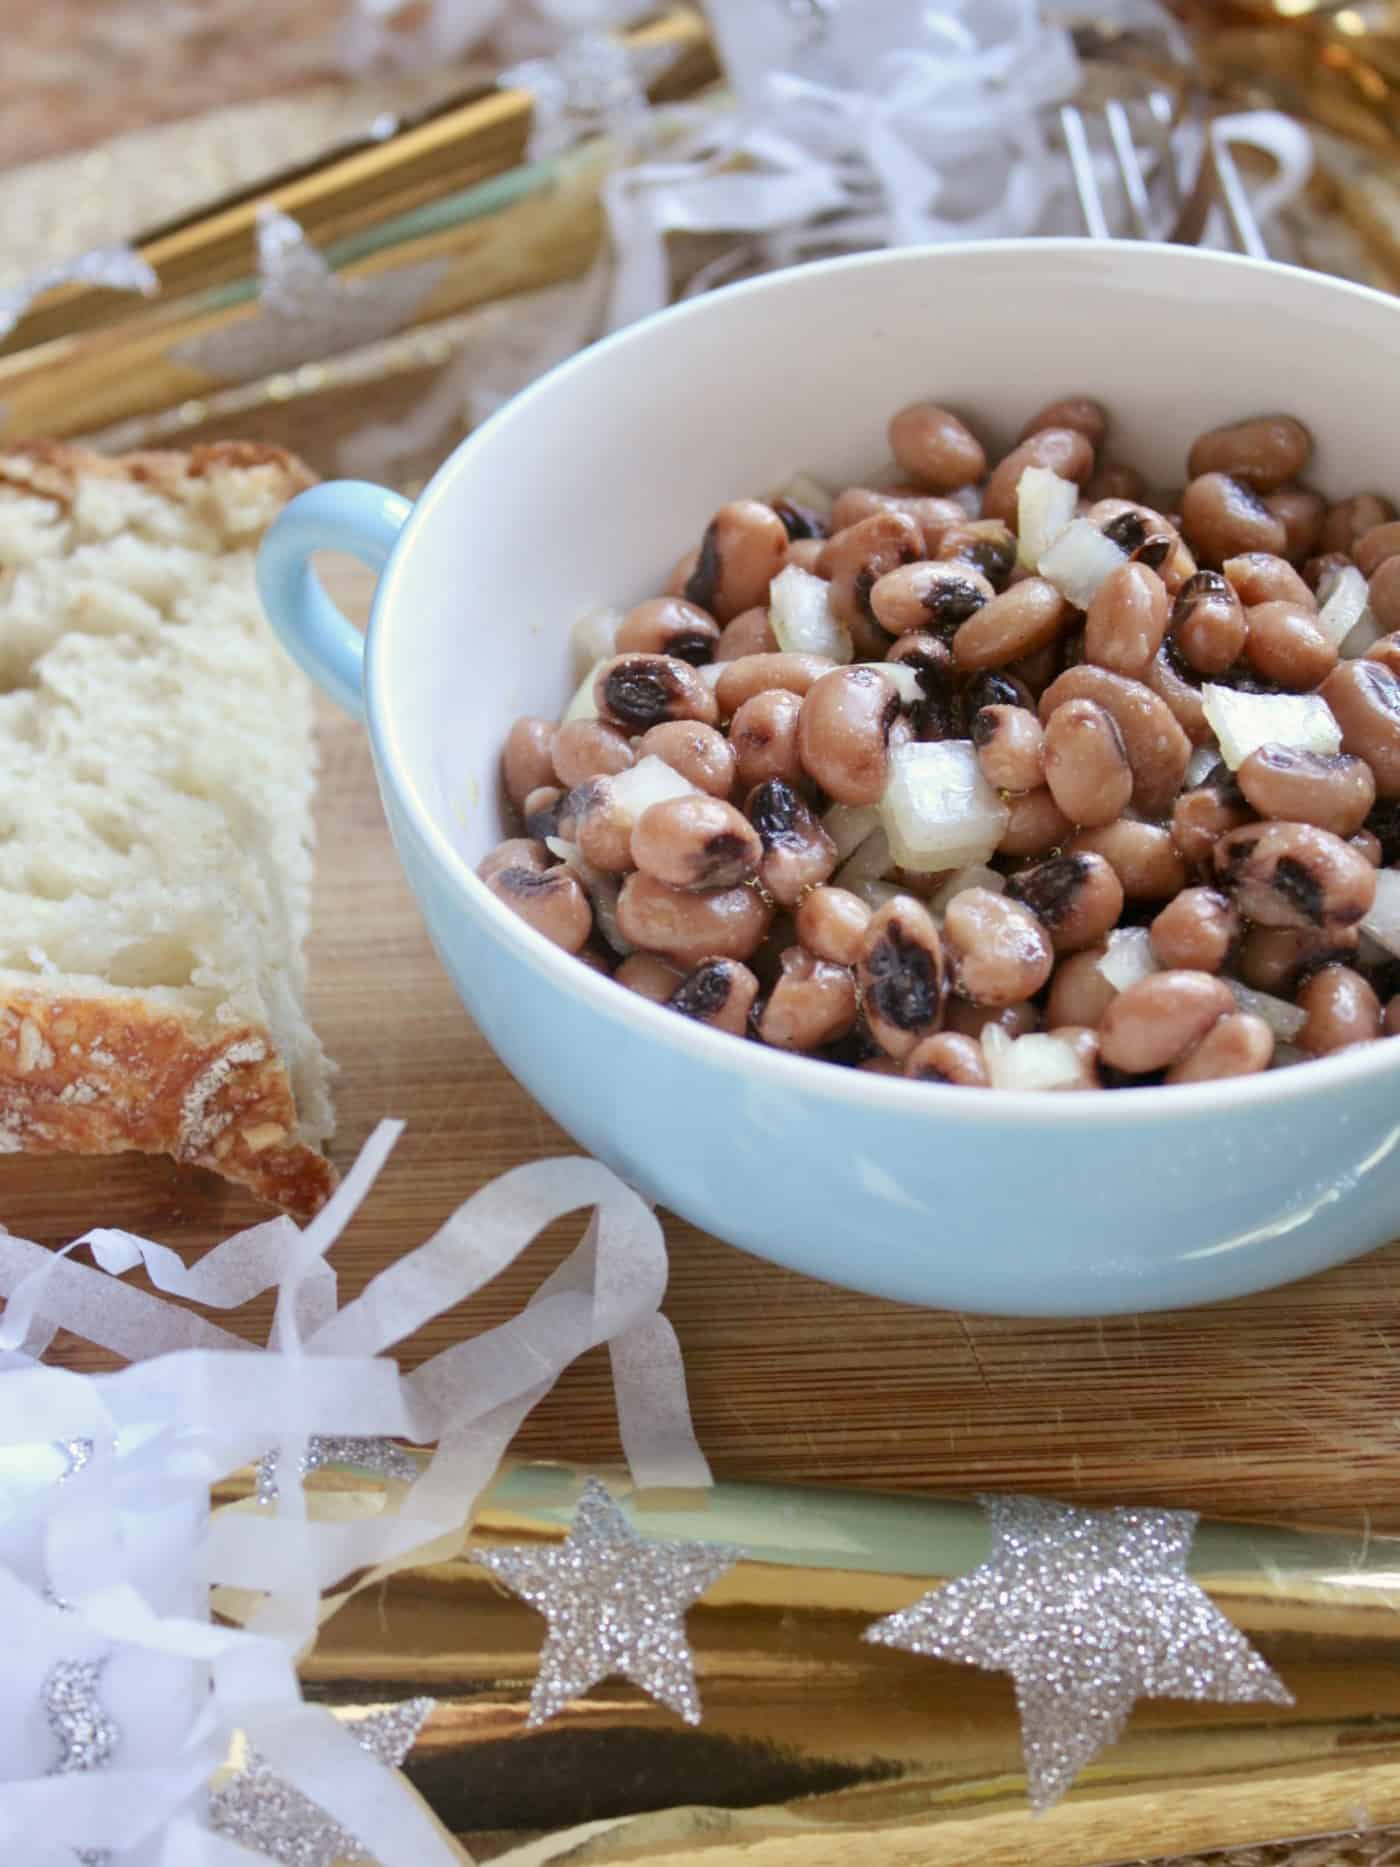 black eyed peas with bread and horns